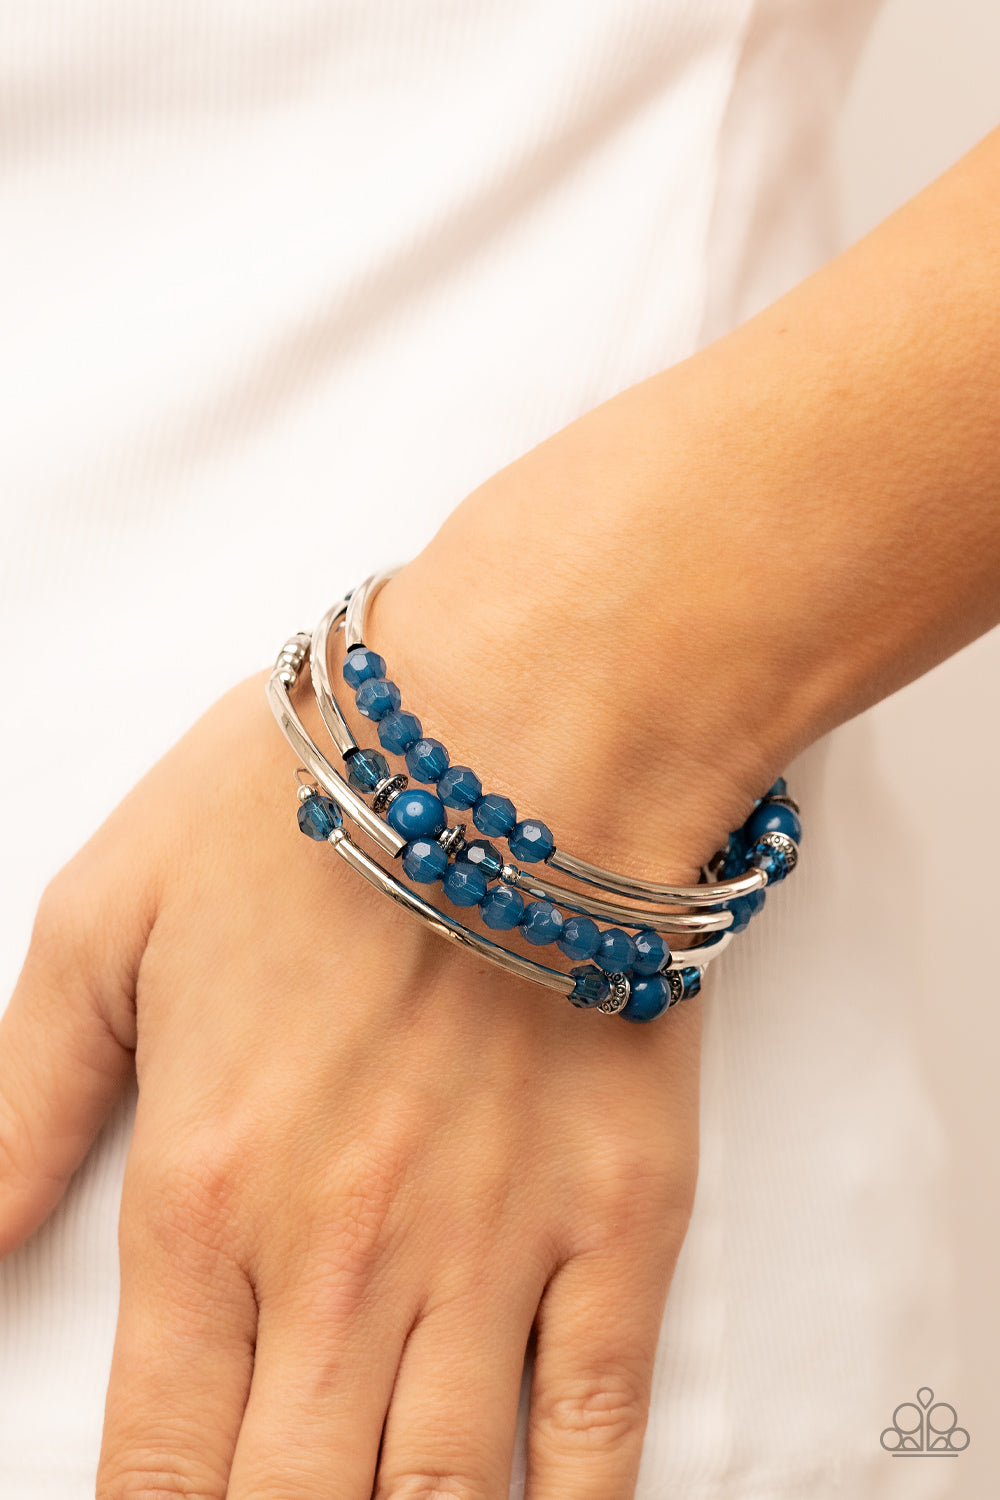 Whimsically Whirly - Blue & Silver Beads, Silver Rods, & Swirly Silver Accents Paparazzi Coil Bracelet